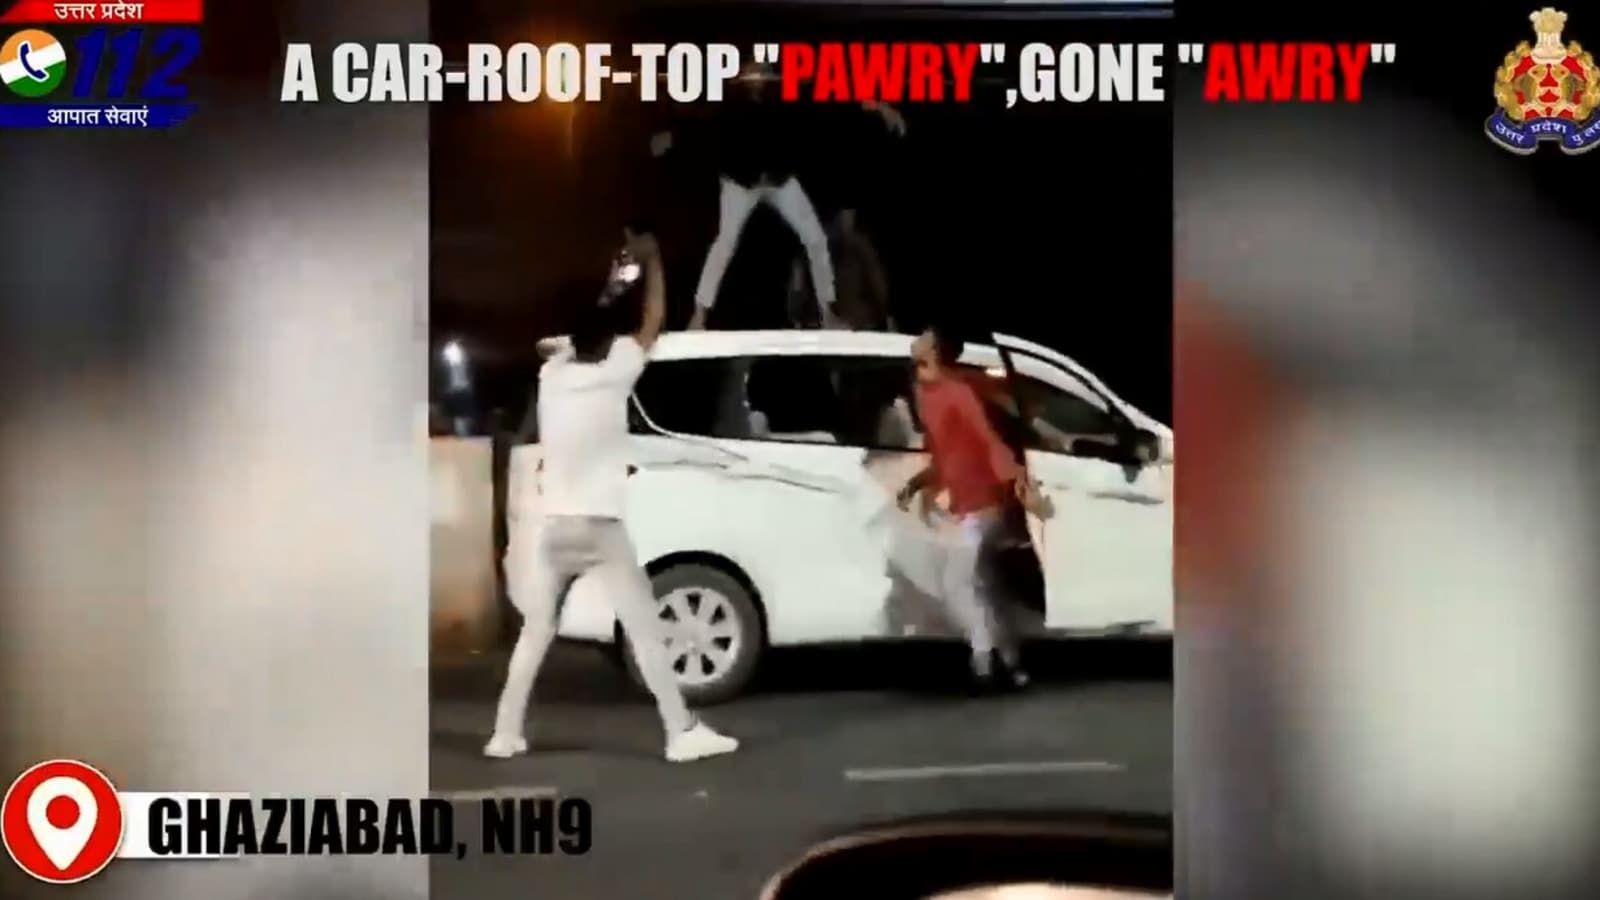 UP Police shares what happens when people party on ‘wrong rooftop’. Watch